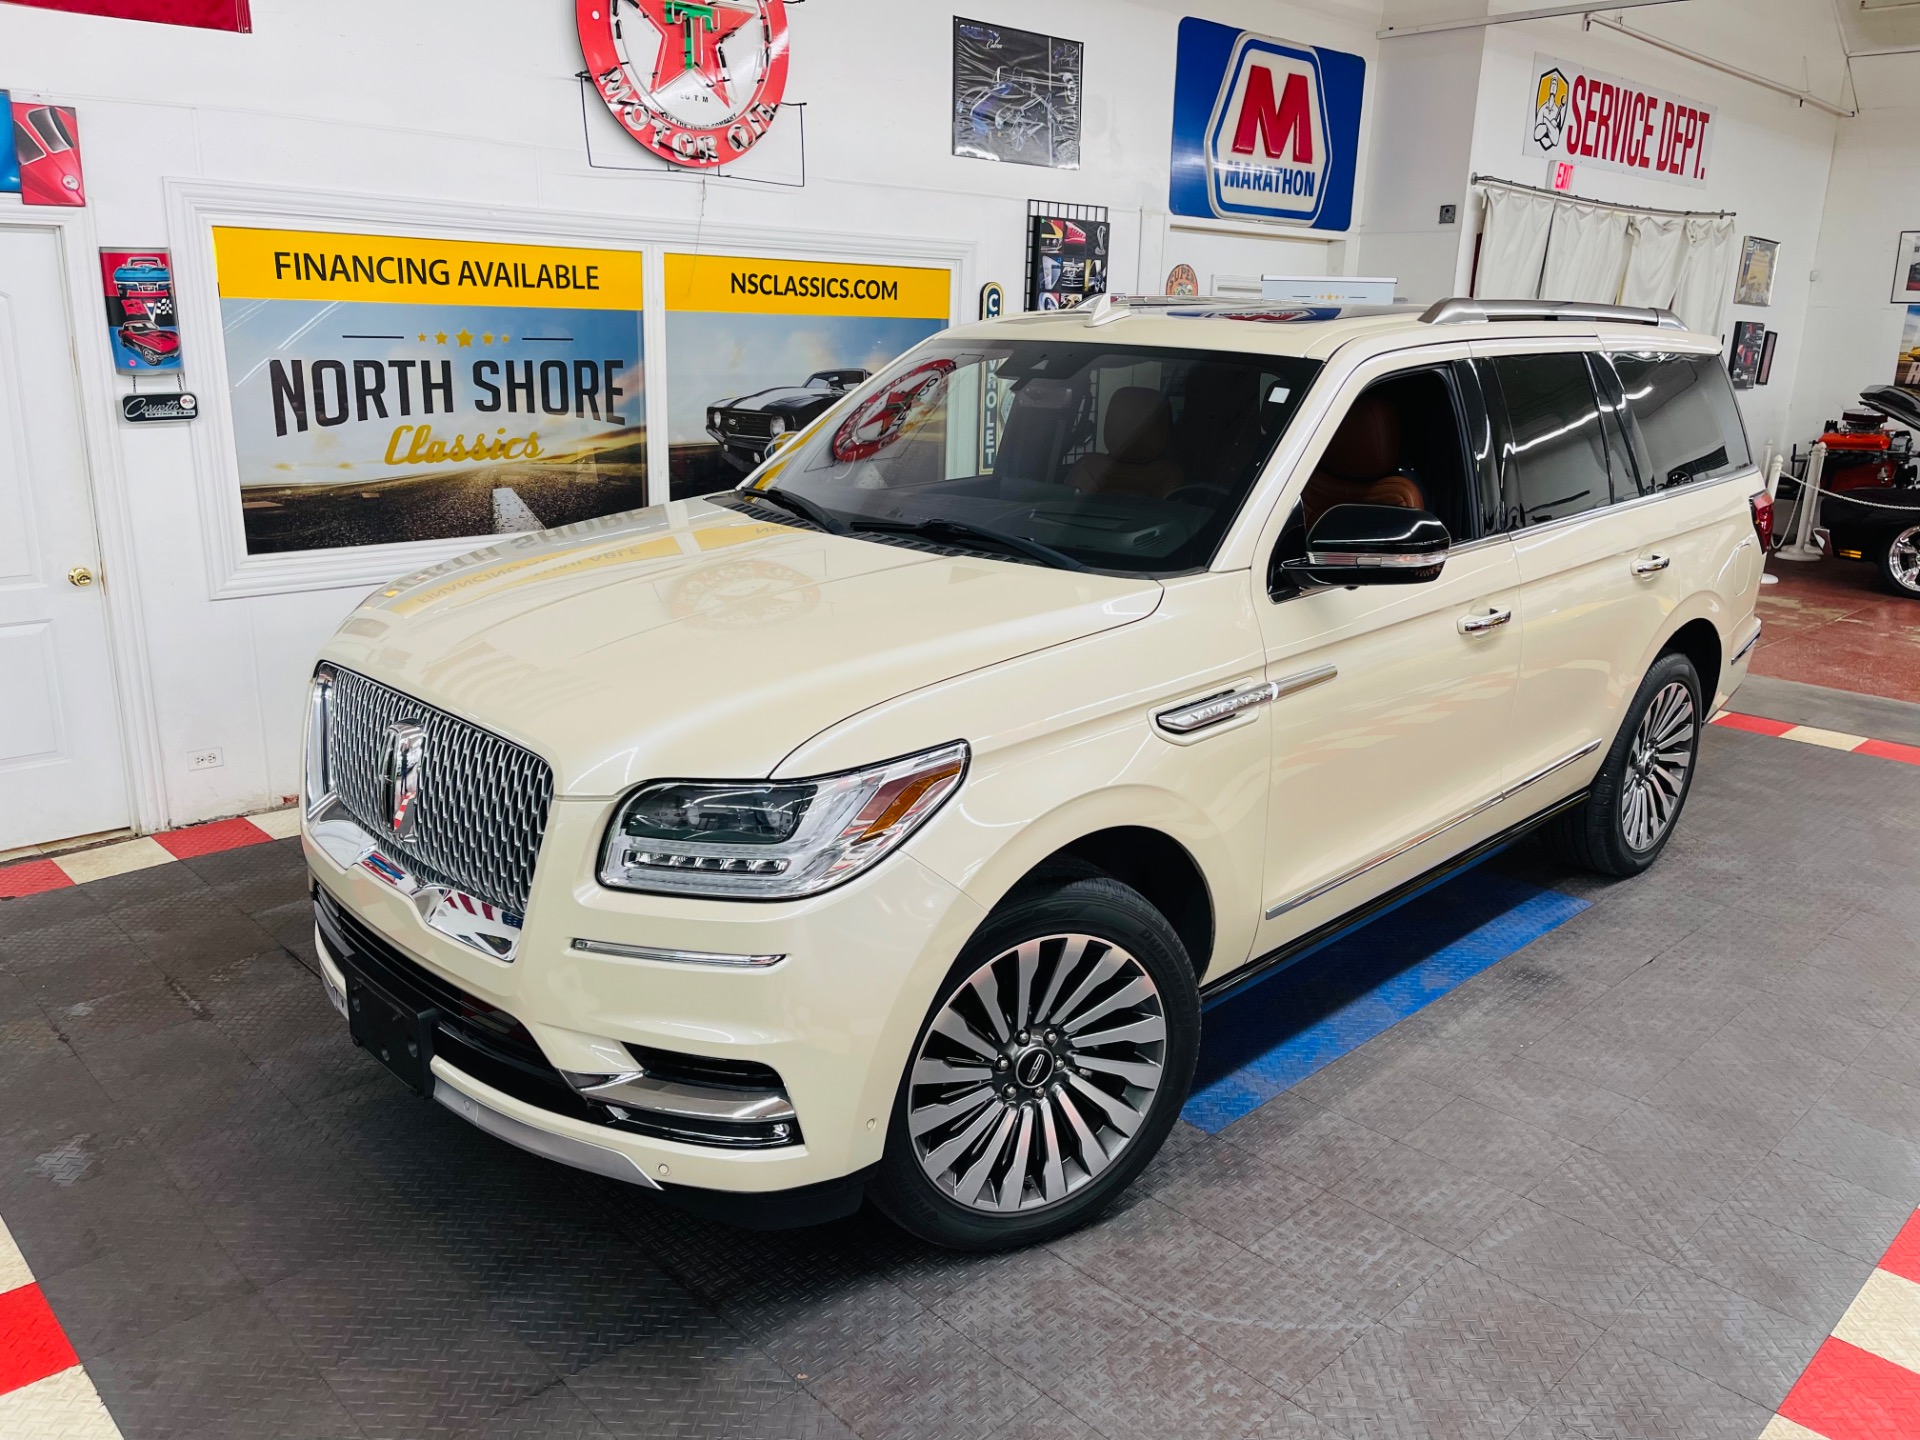 Used 2018 Lincoln Navigator Reserve SEE VIDEO For Sale (Sold) North  Shore Classics Stock #18699JWCV